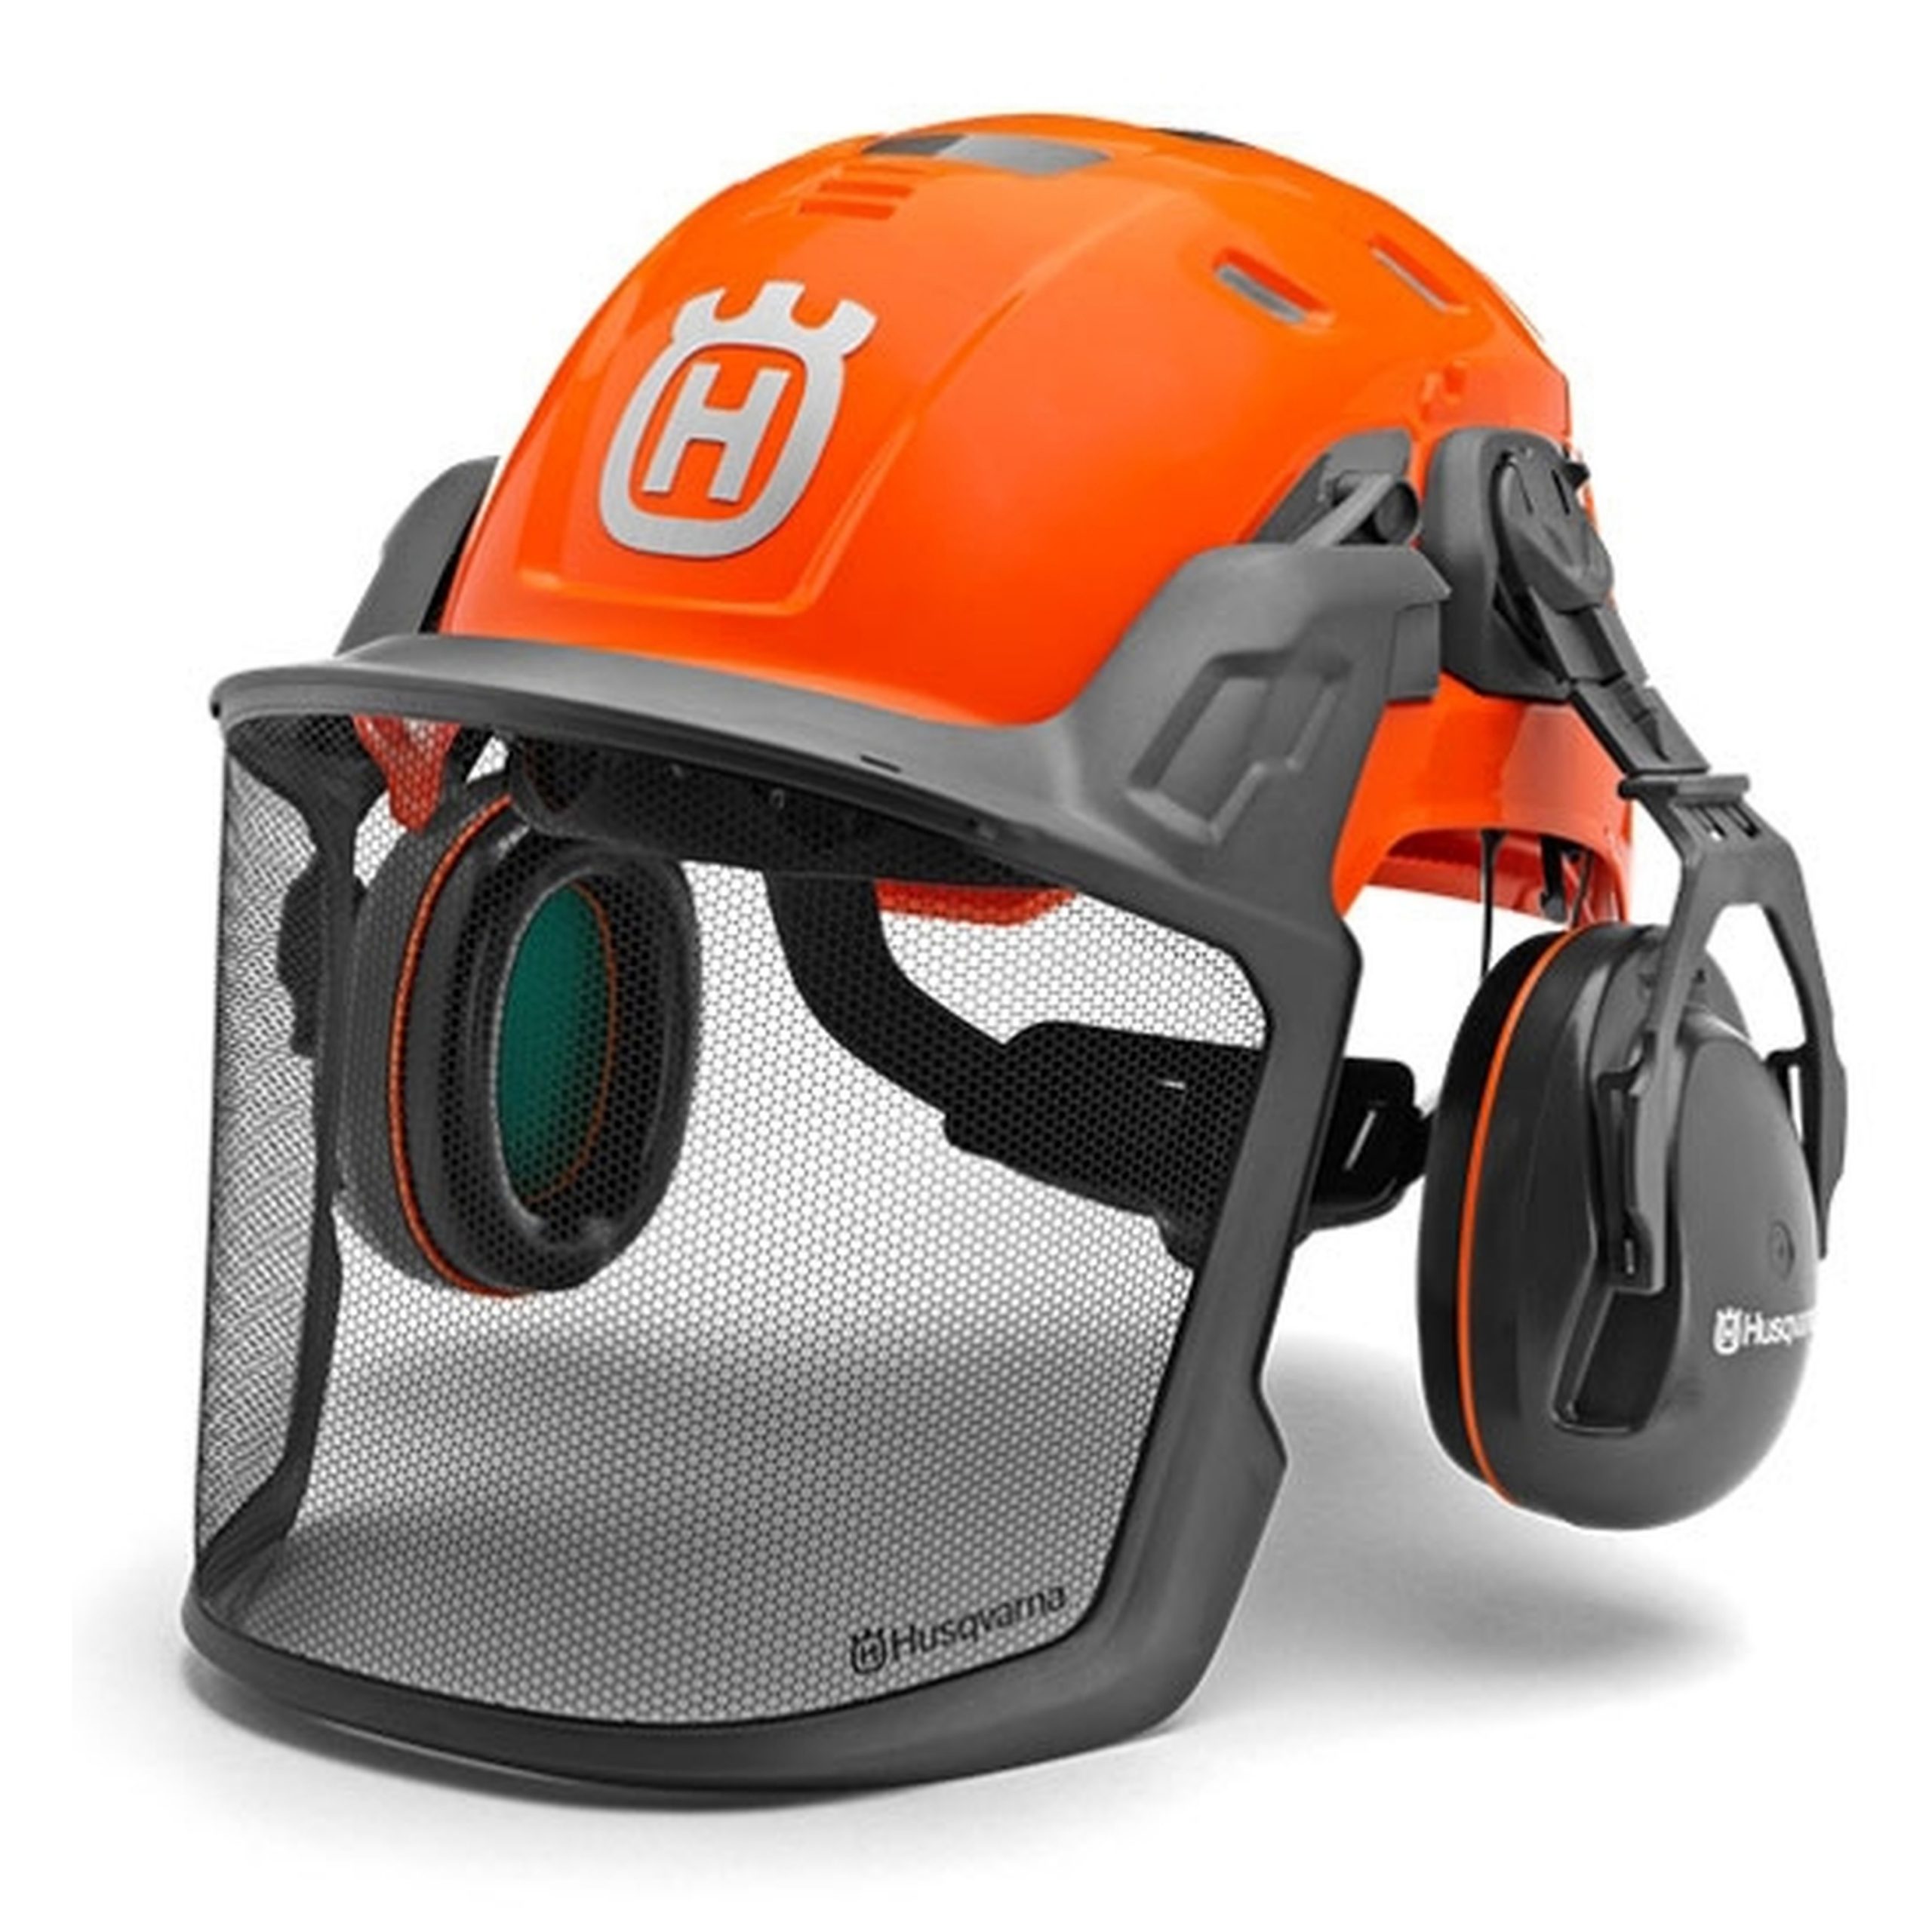 Husqvarna 585 07 73-01: Technical Forest Safety Helmet - Click Image to Close